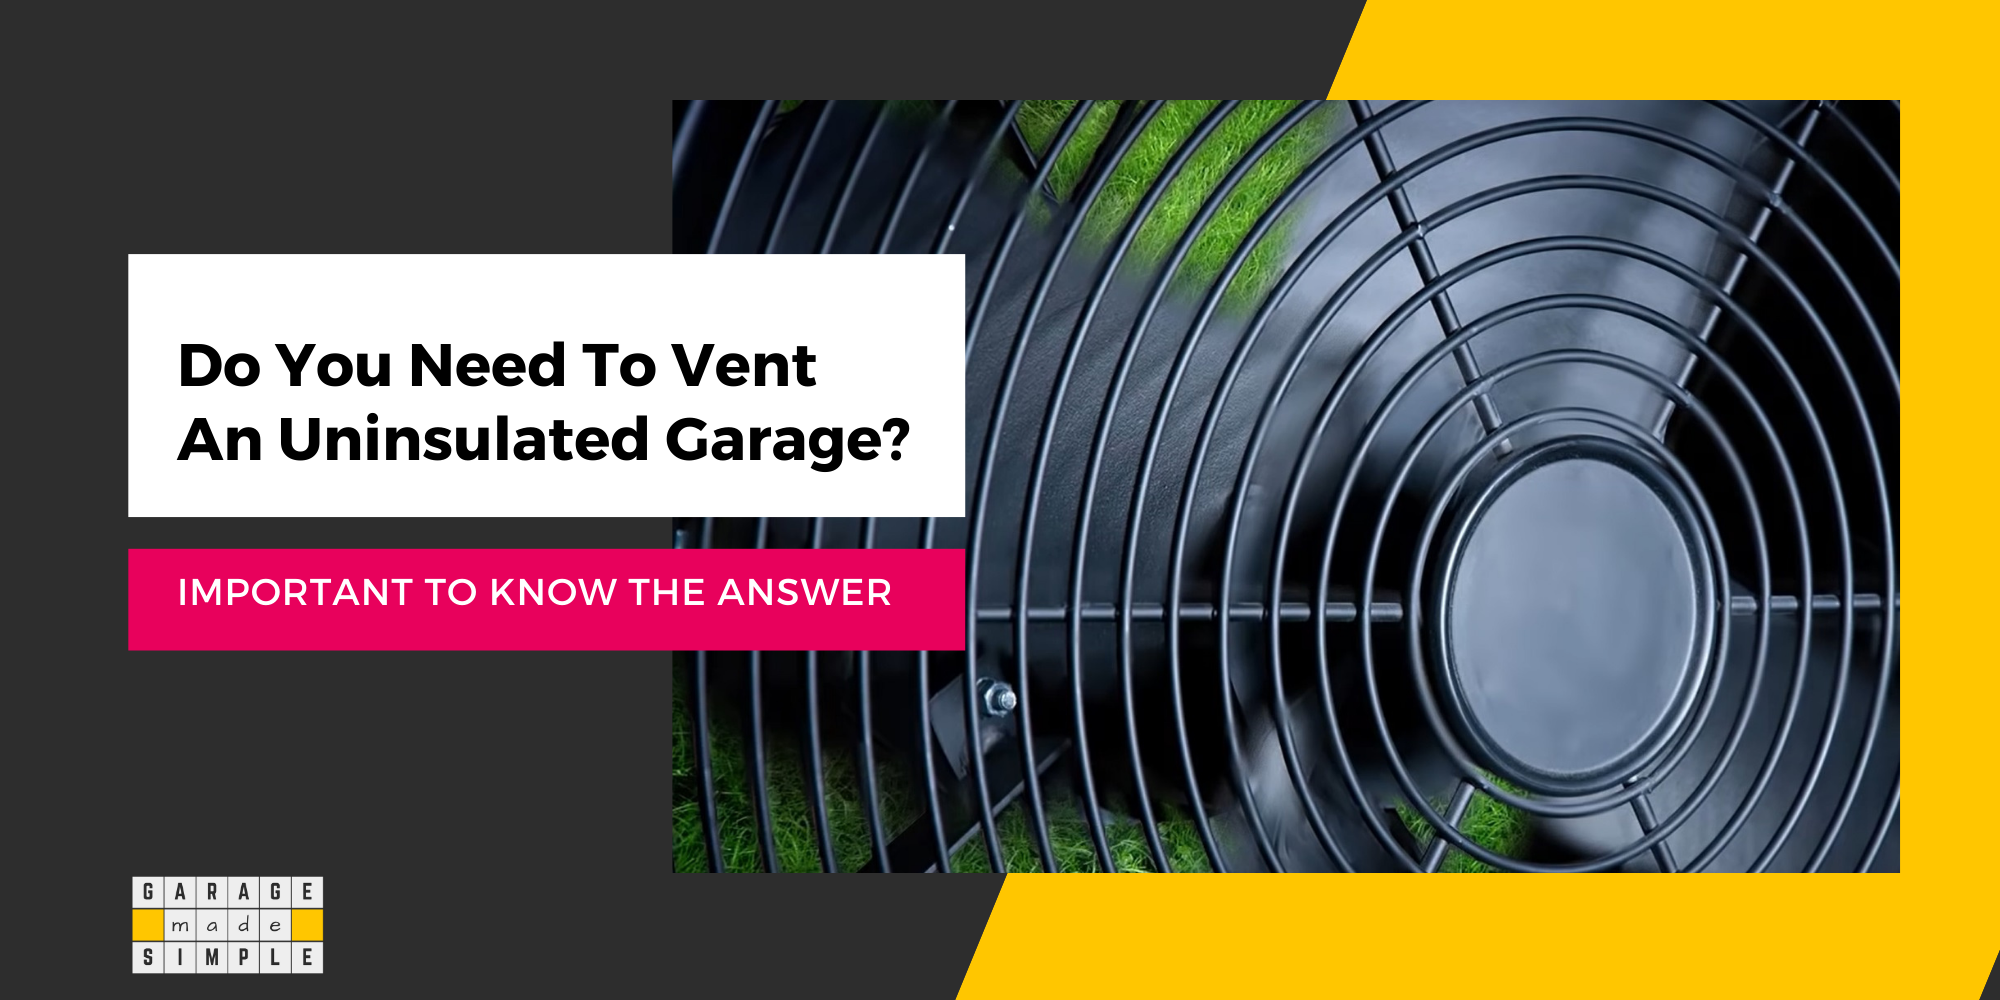 Do You Need To Vent An Uninsulated Garage? (Important!)